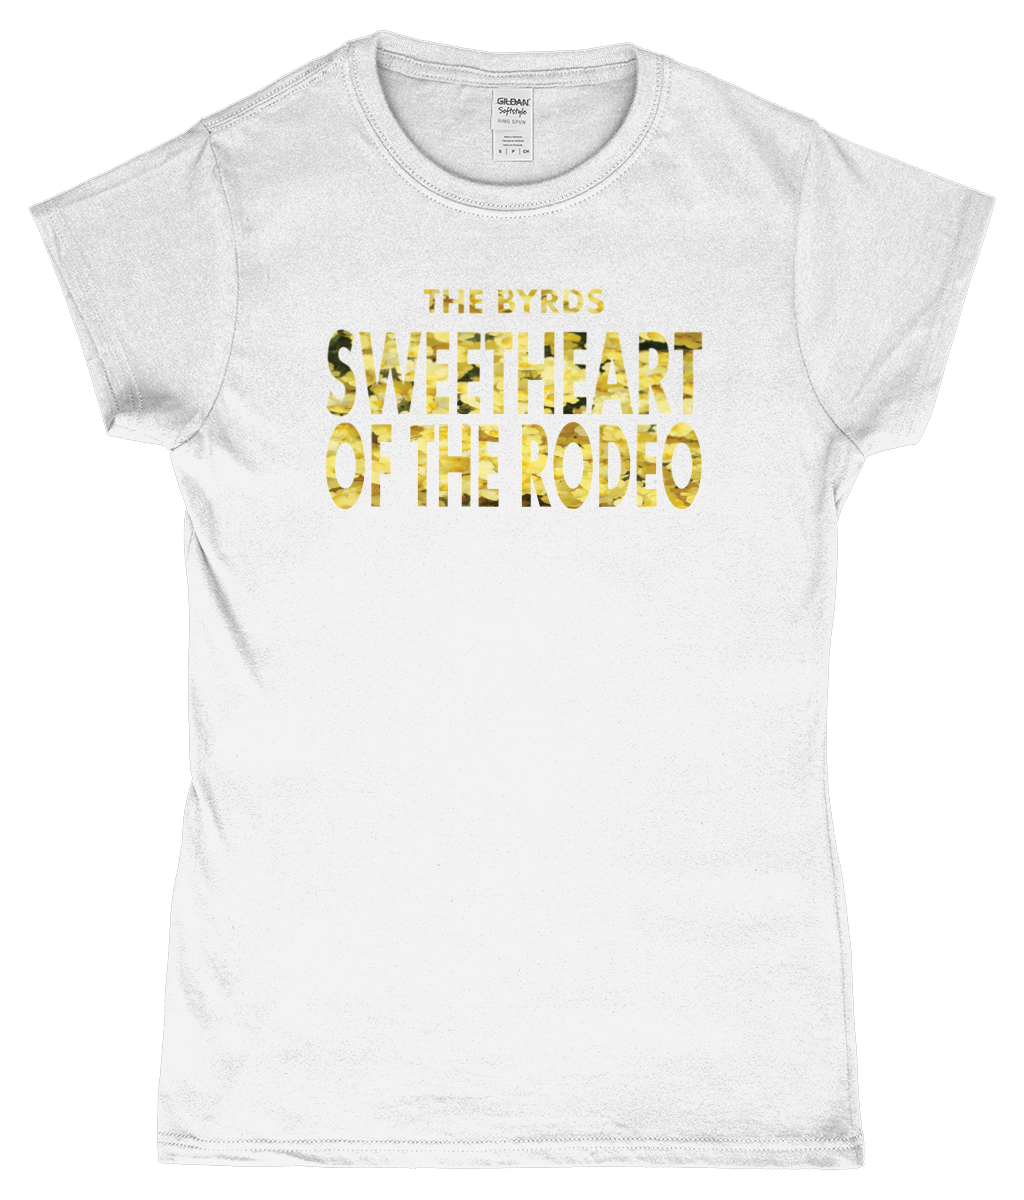 The Byrds, Sweetheart of the Rodeo, T-Shirt, Women's